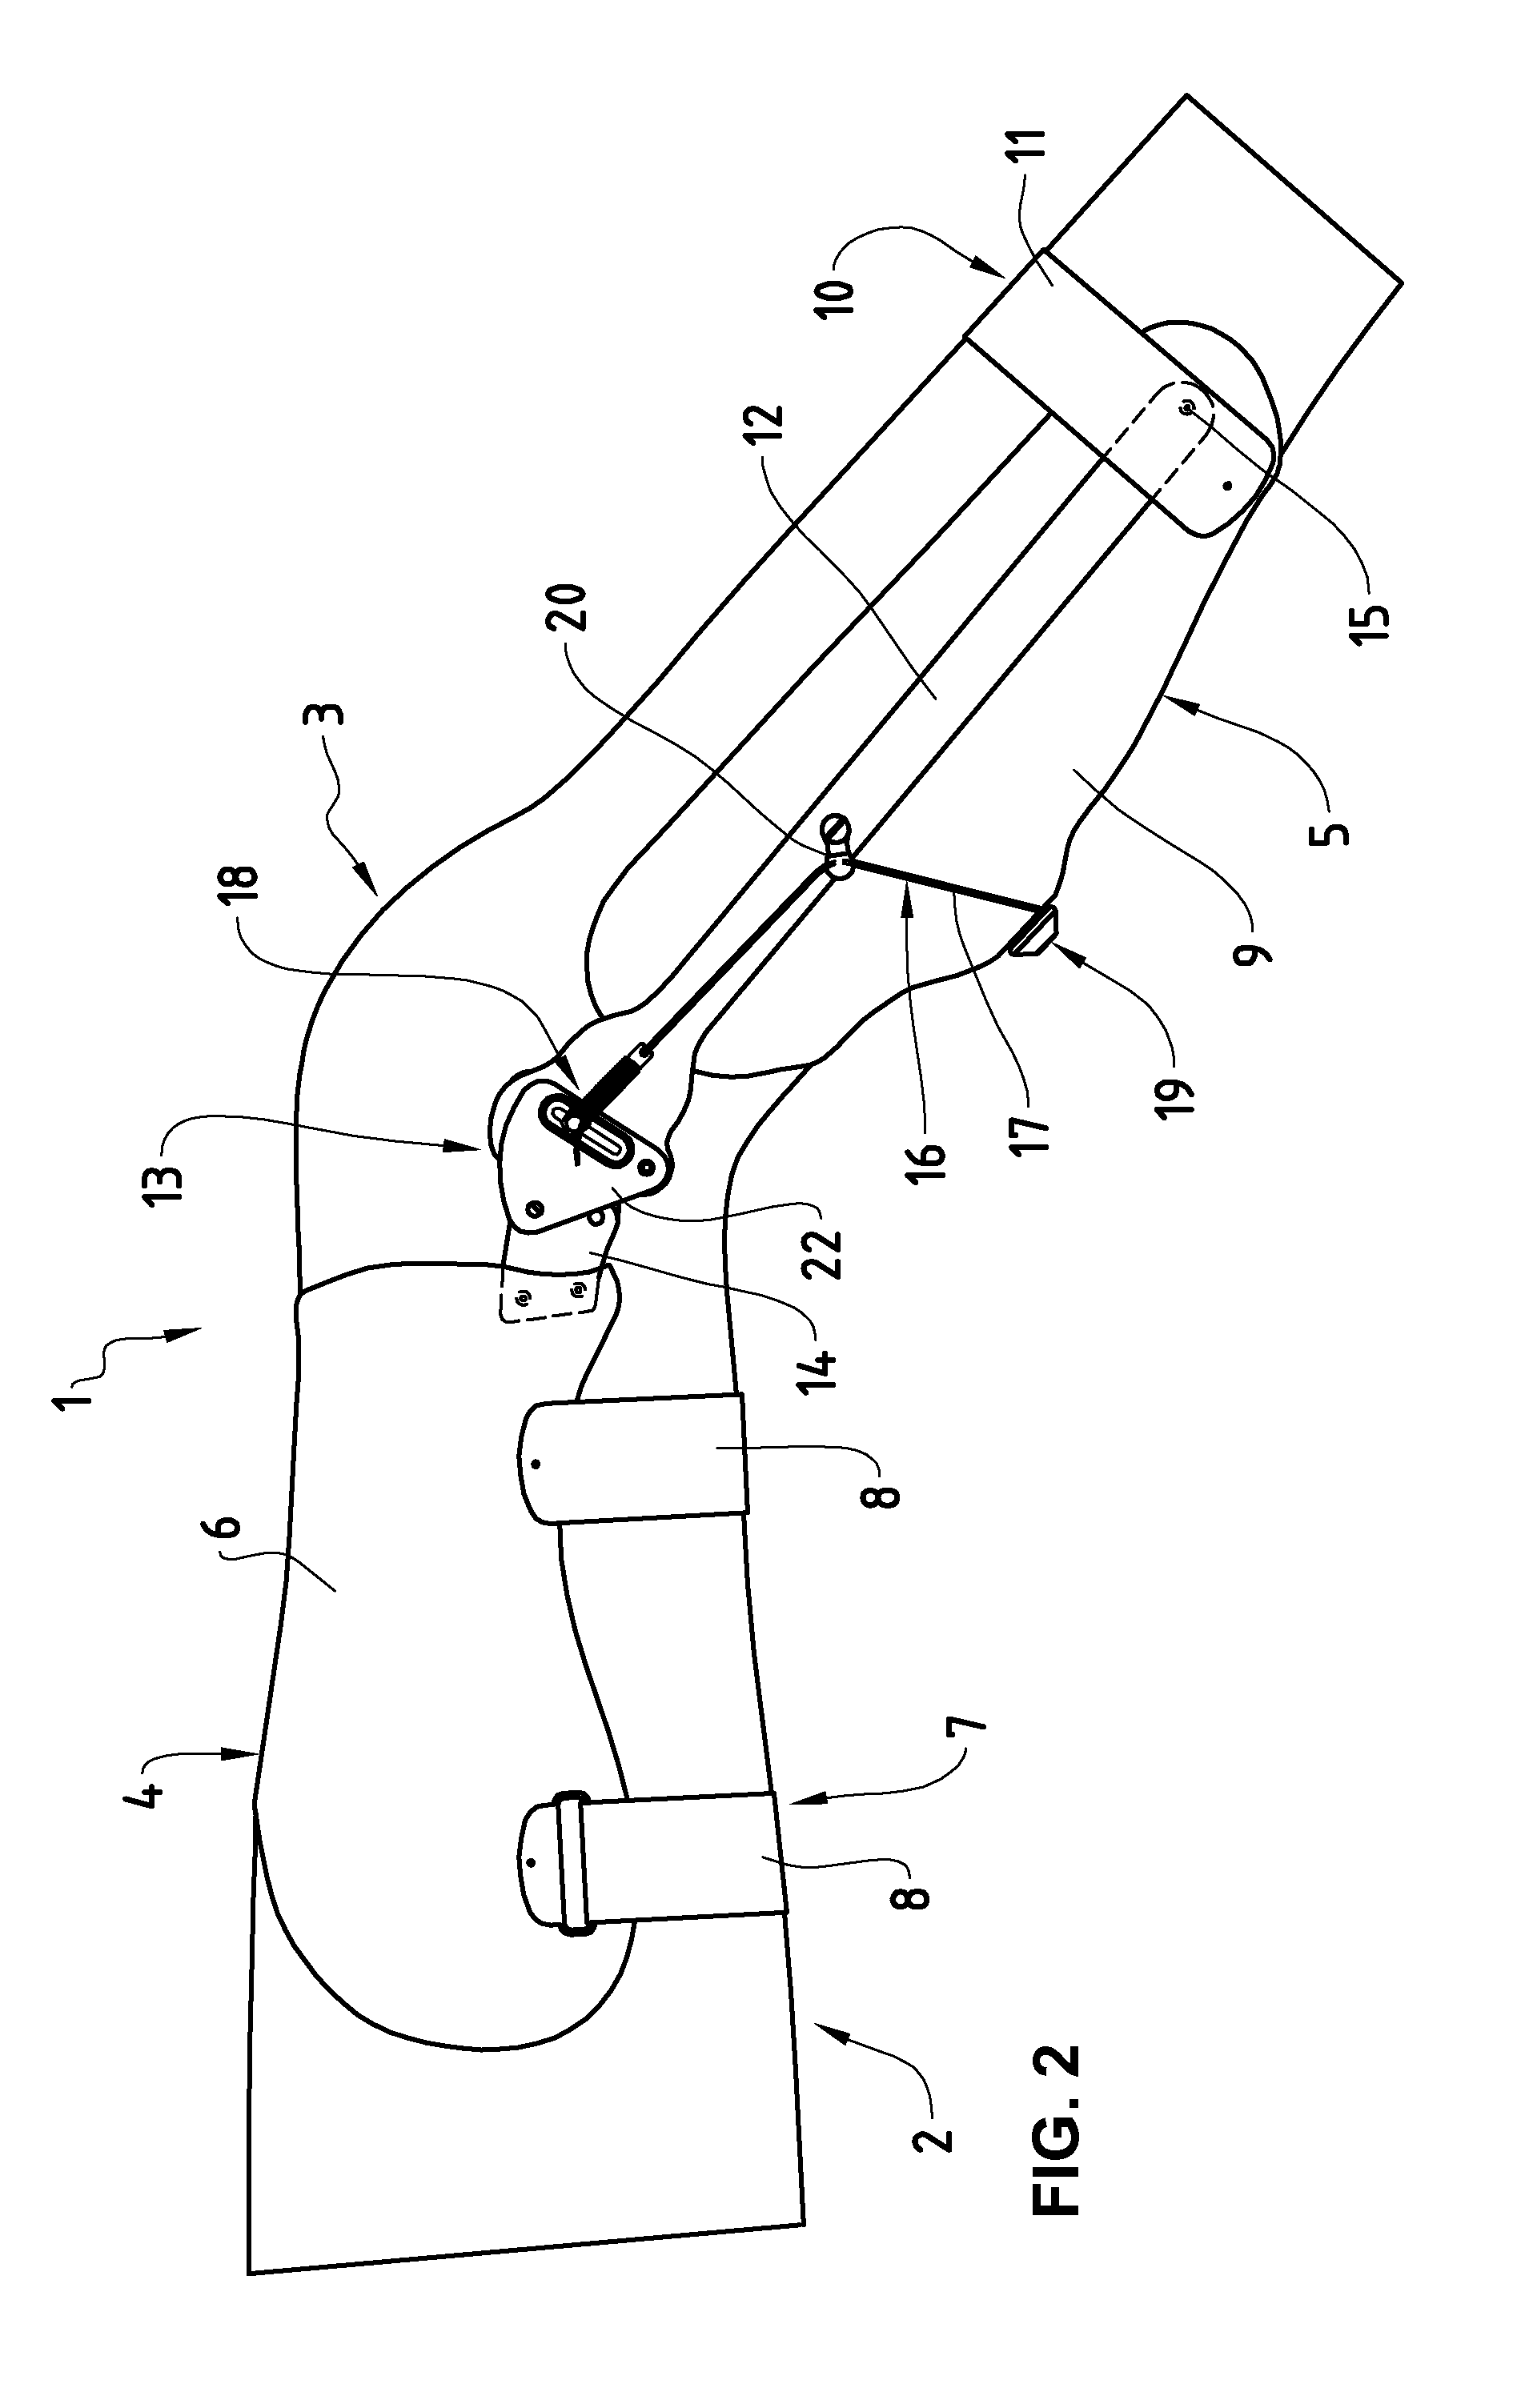 Knee orthosis for support of a knee joint